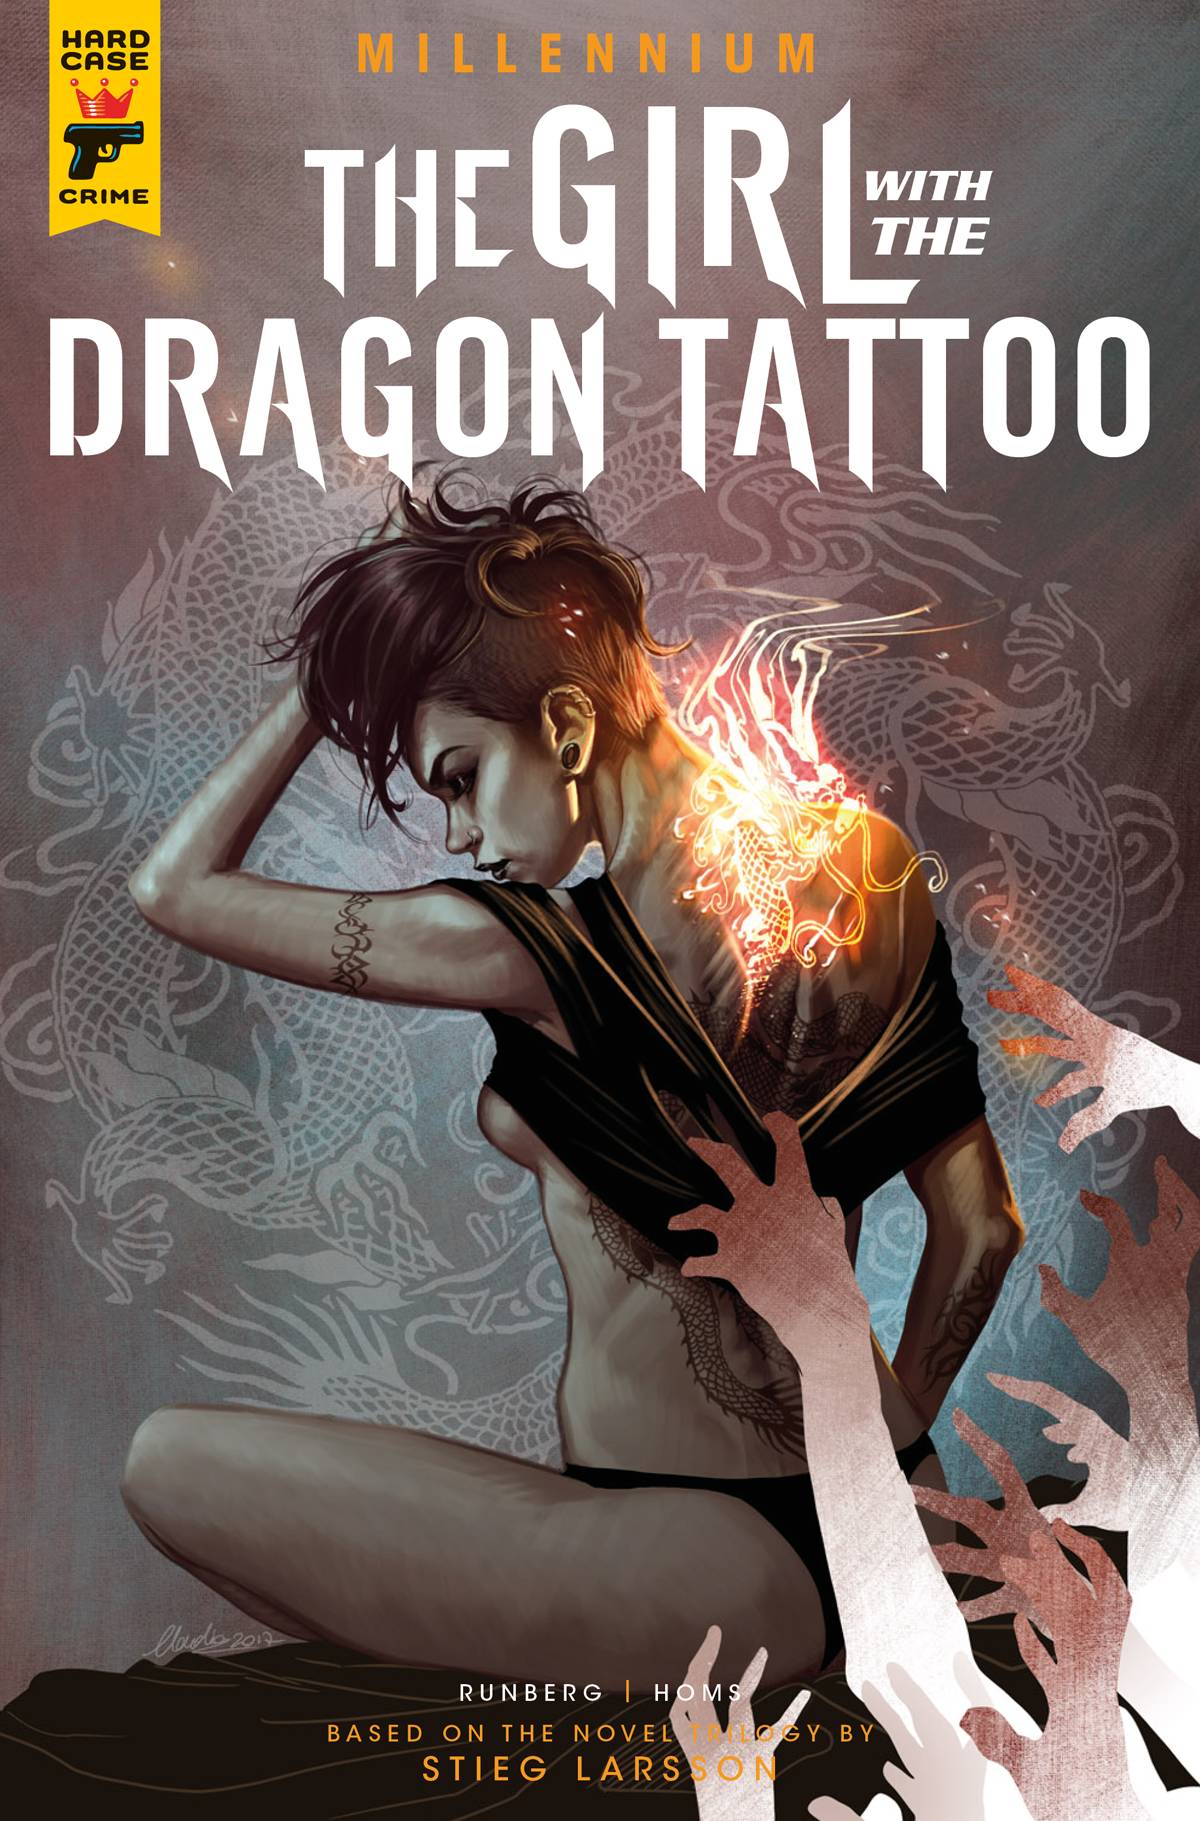 MILLENNIUM--THE GIRL WITH THE DRAGON TATTOO#2